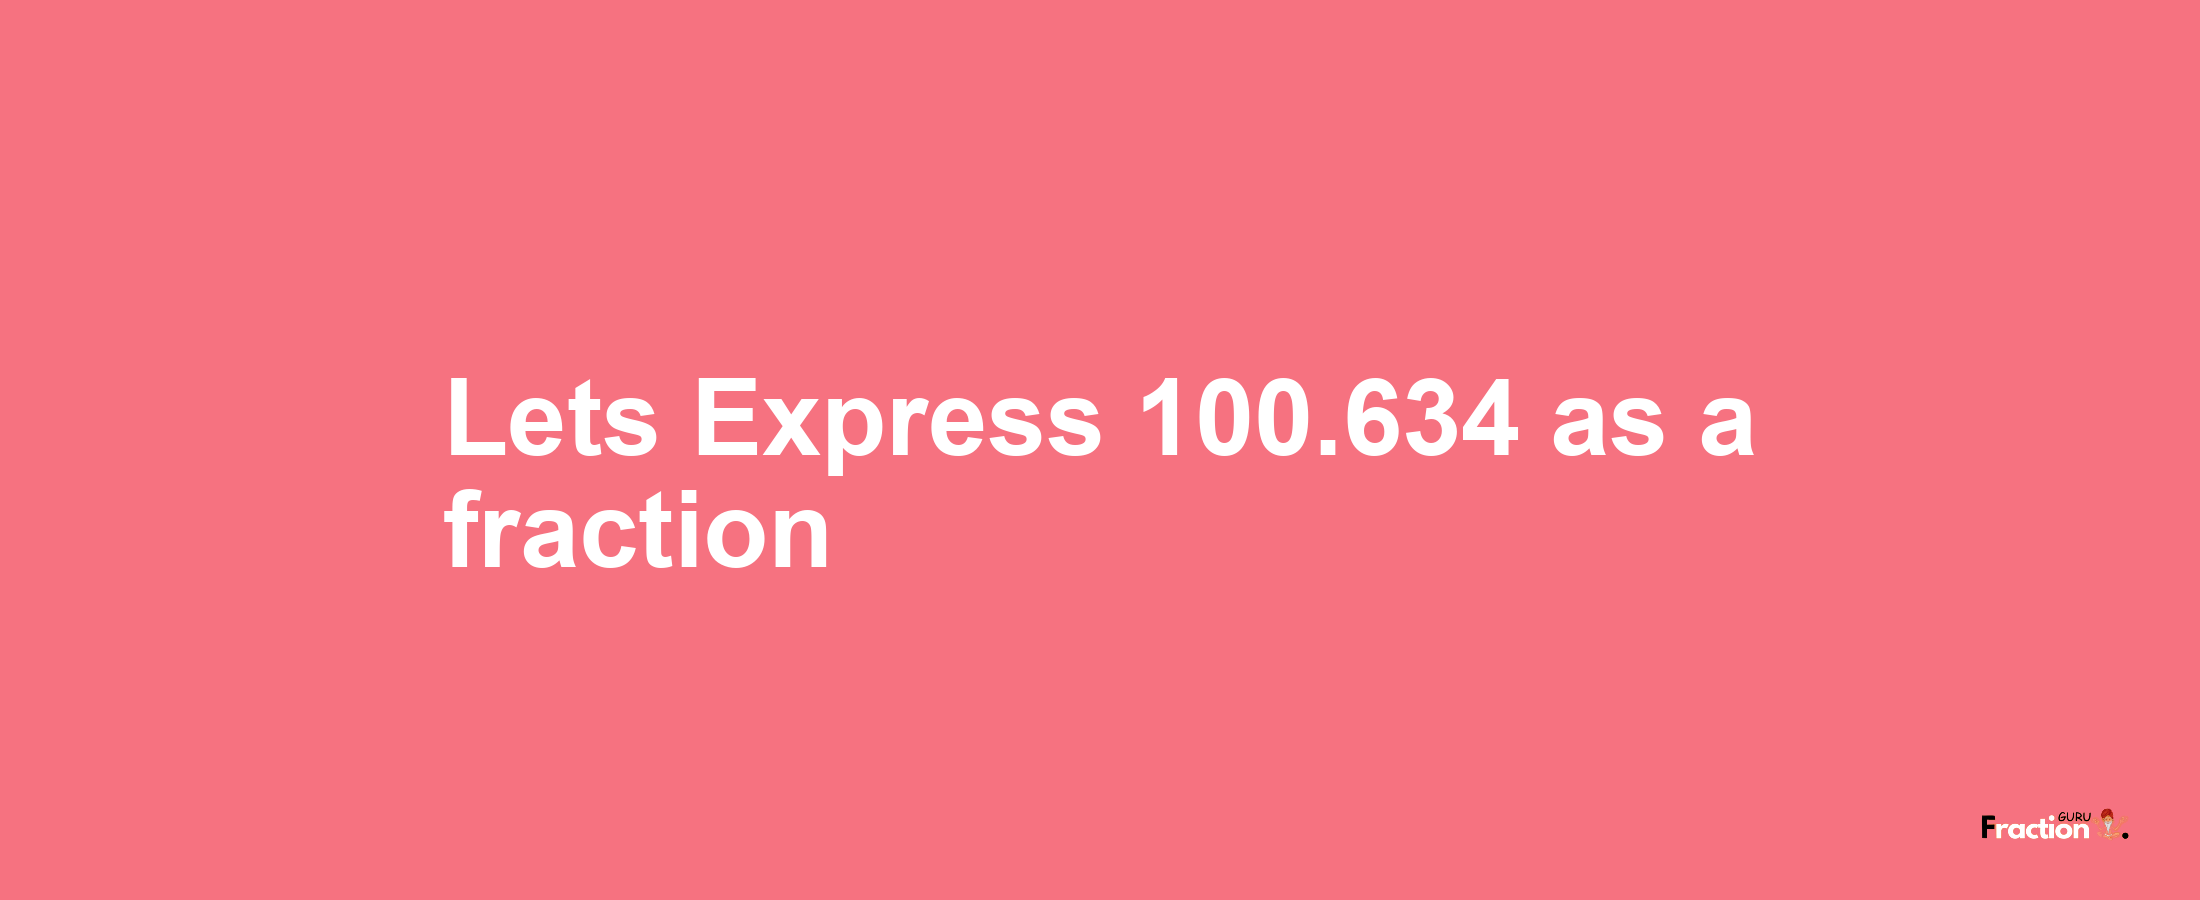 Lets Express 100.634 as afraction